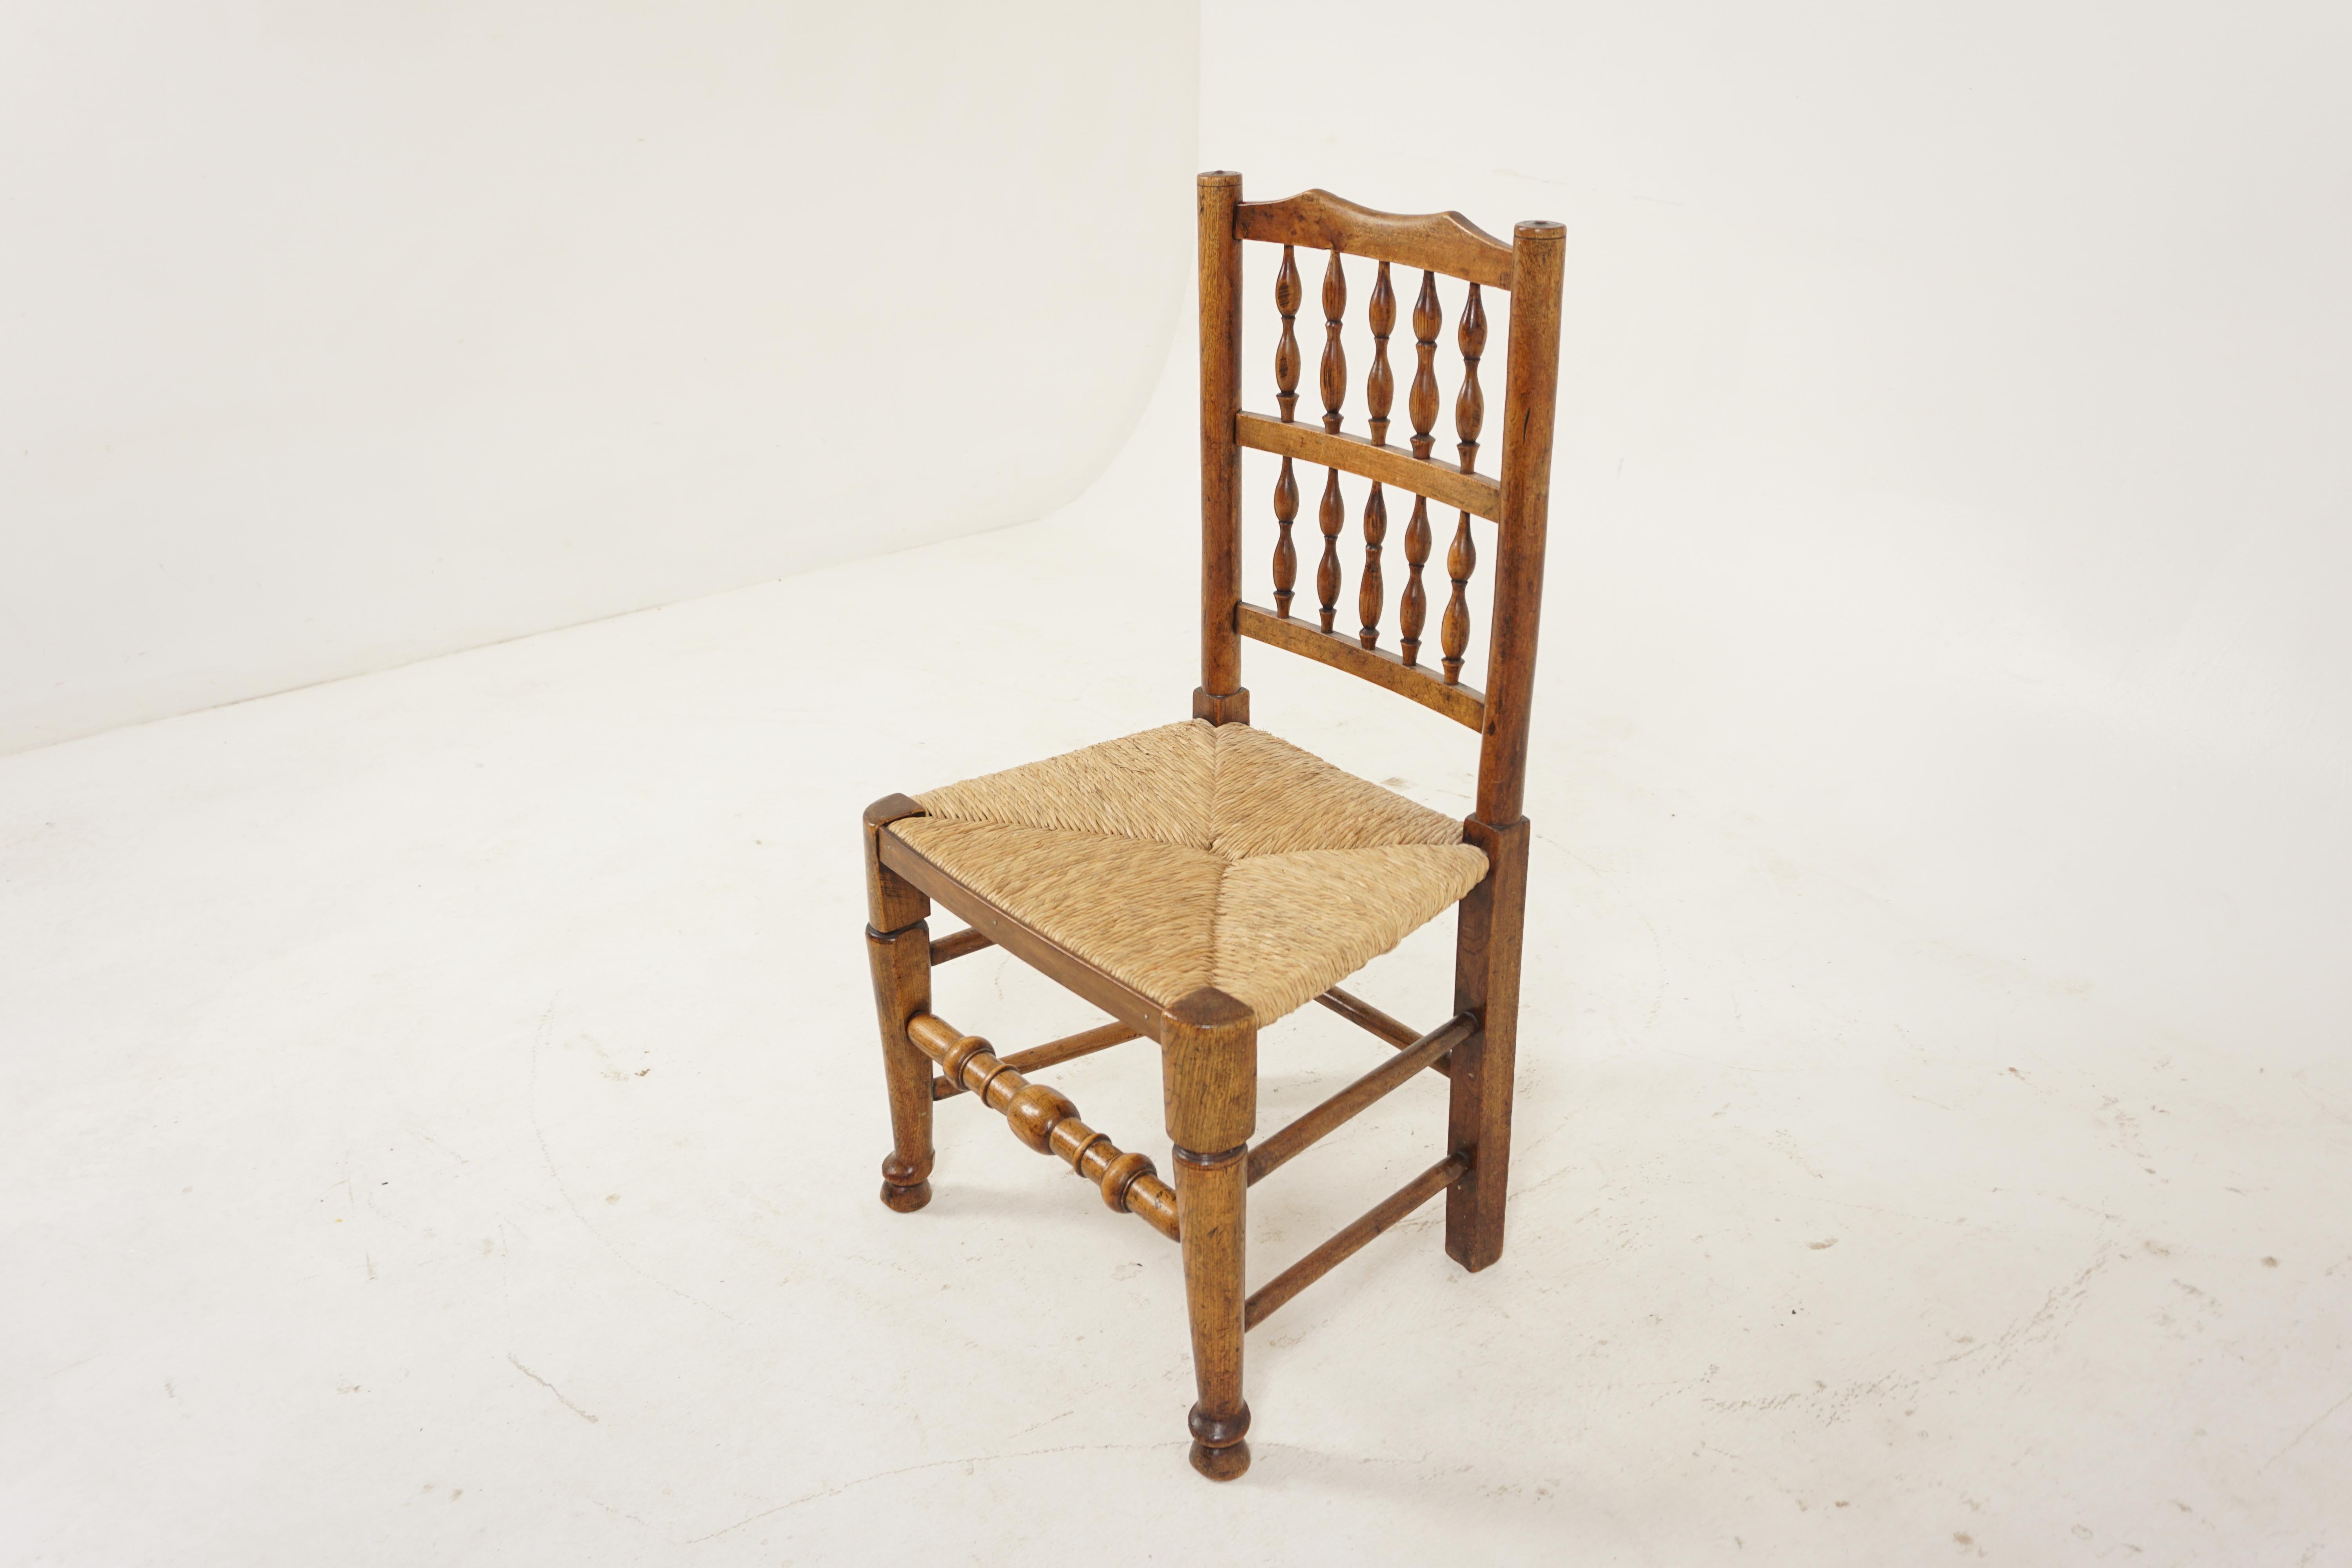 Antique elm and beechwood Lancashire rope seated chair, Scotland 1900, H380

Scotland 1900
Solid Elm
Original finish
Shaped to rail
With decorative turned spindle back
With rope seat
Supported on shaped front legs
The front legs terminate in pad